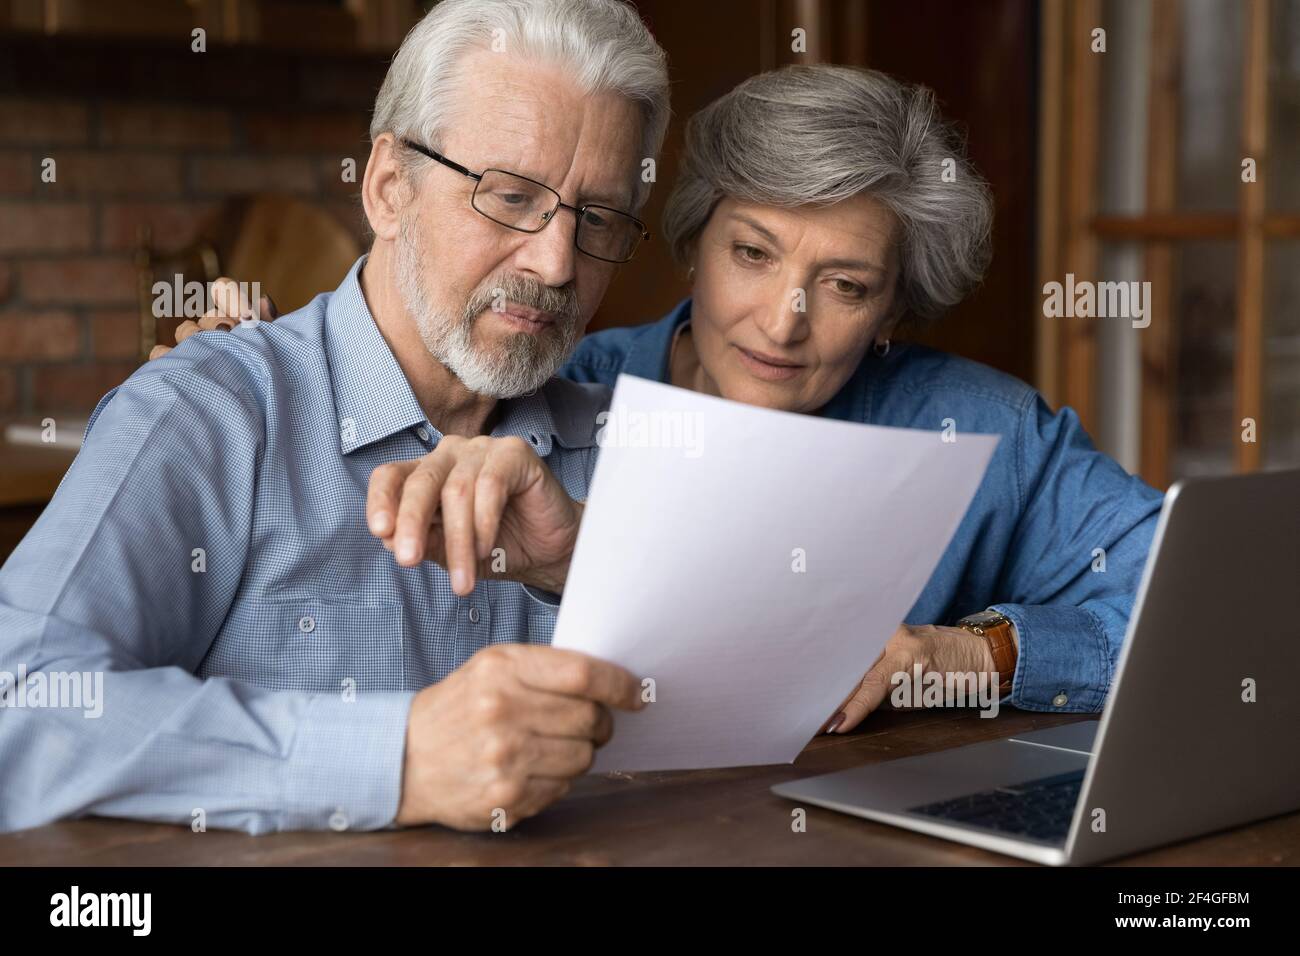 Old age married couple do paperwork engaged in reading document Stock Photo